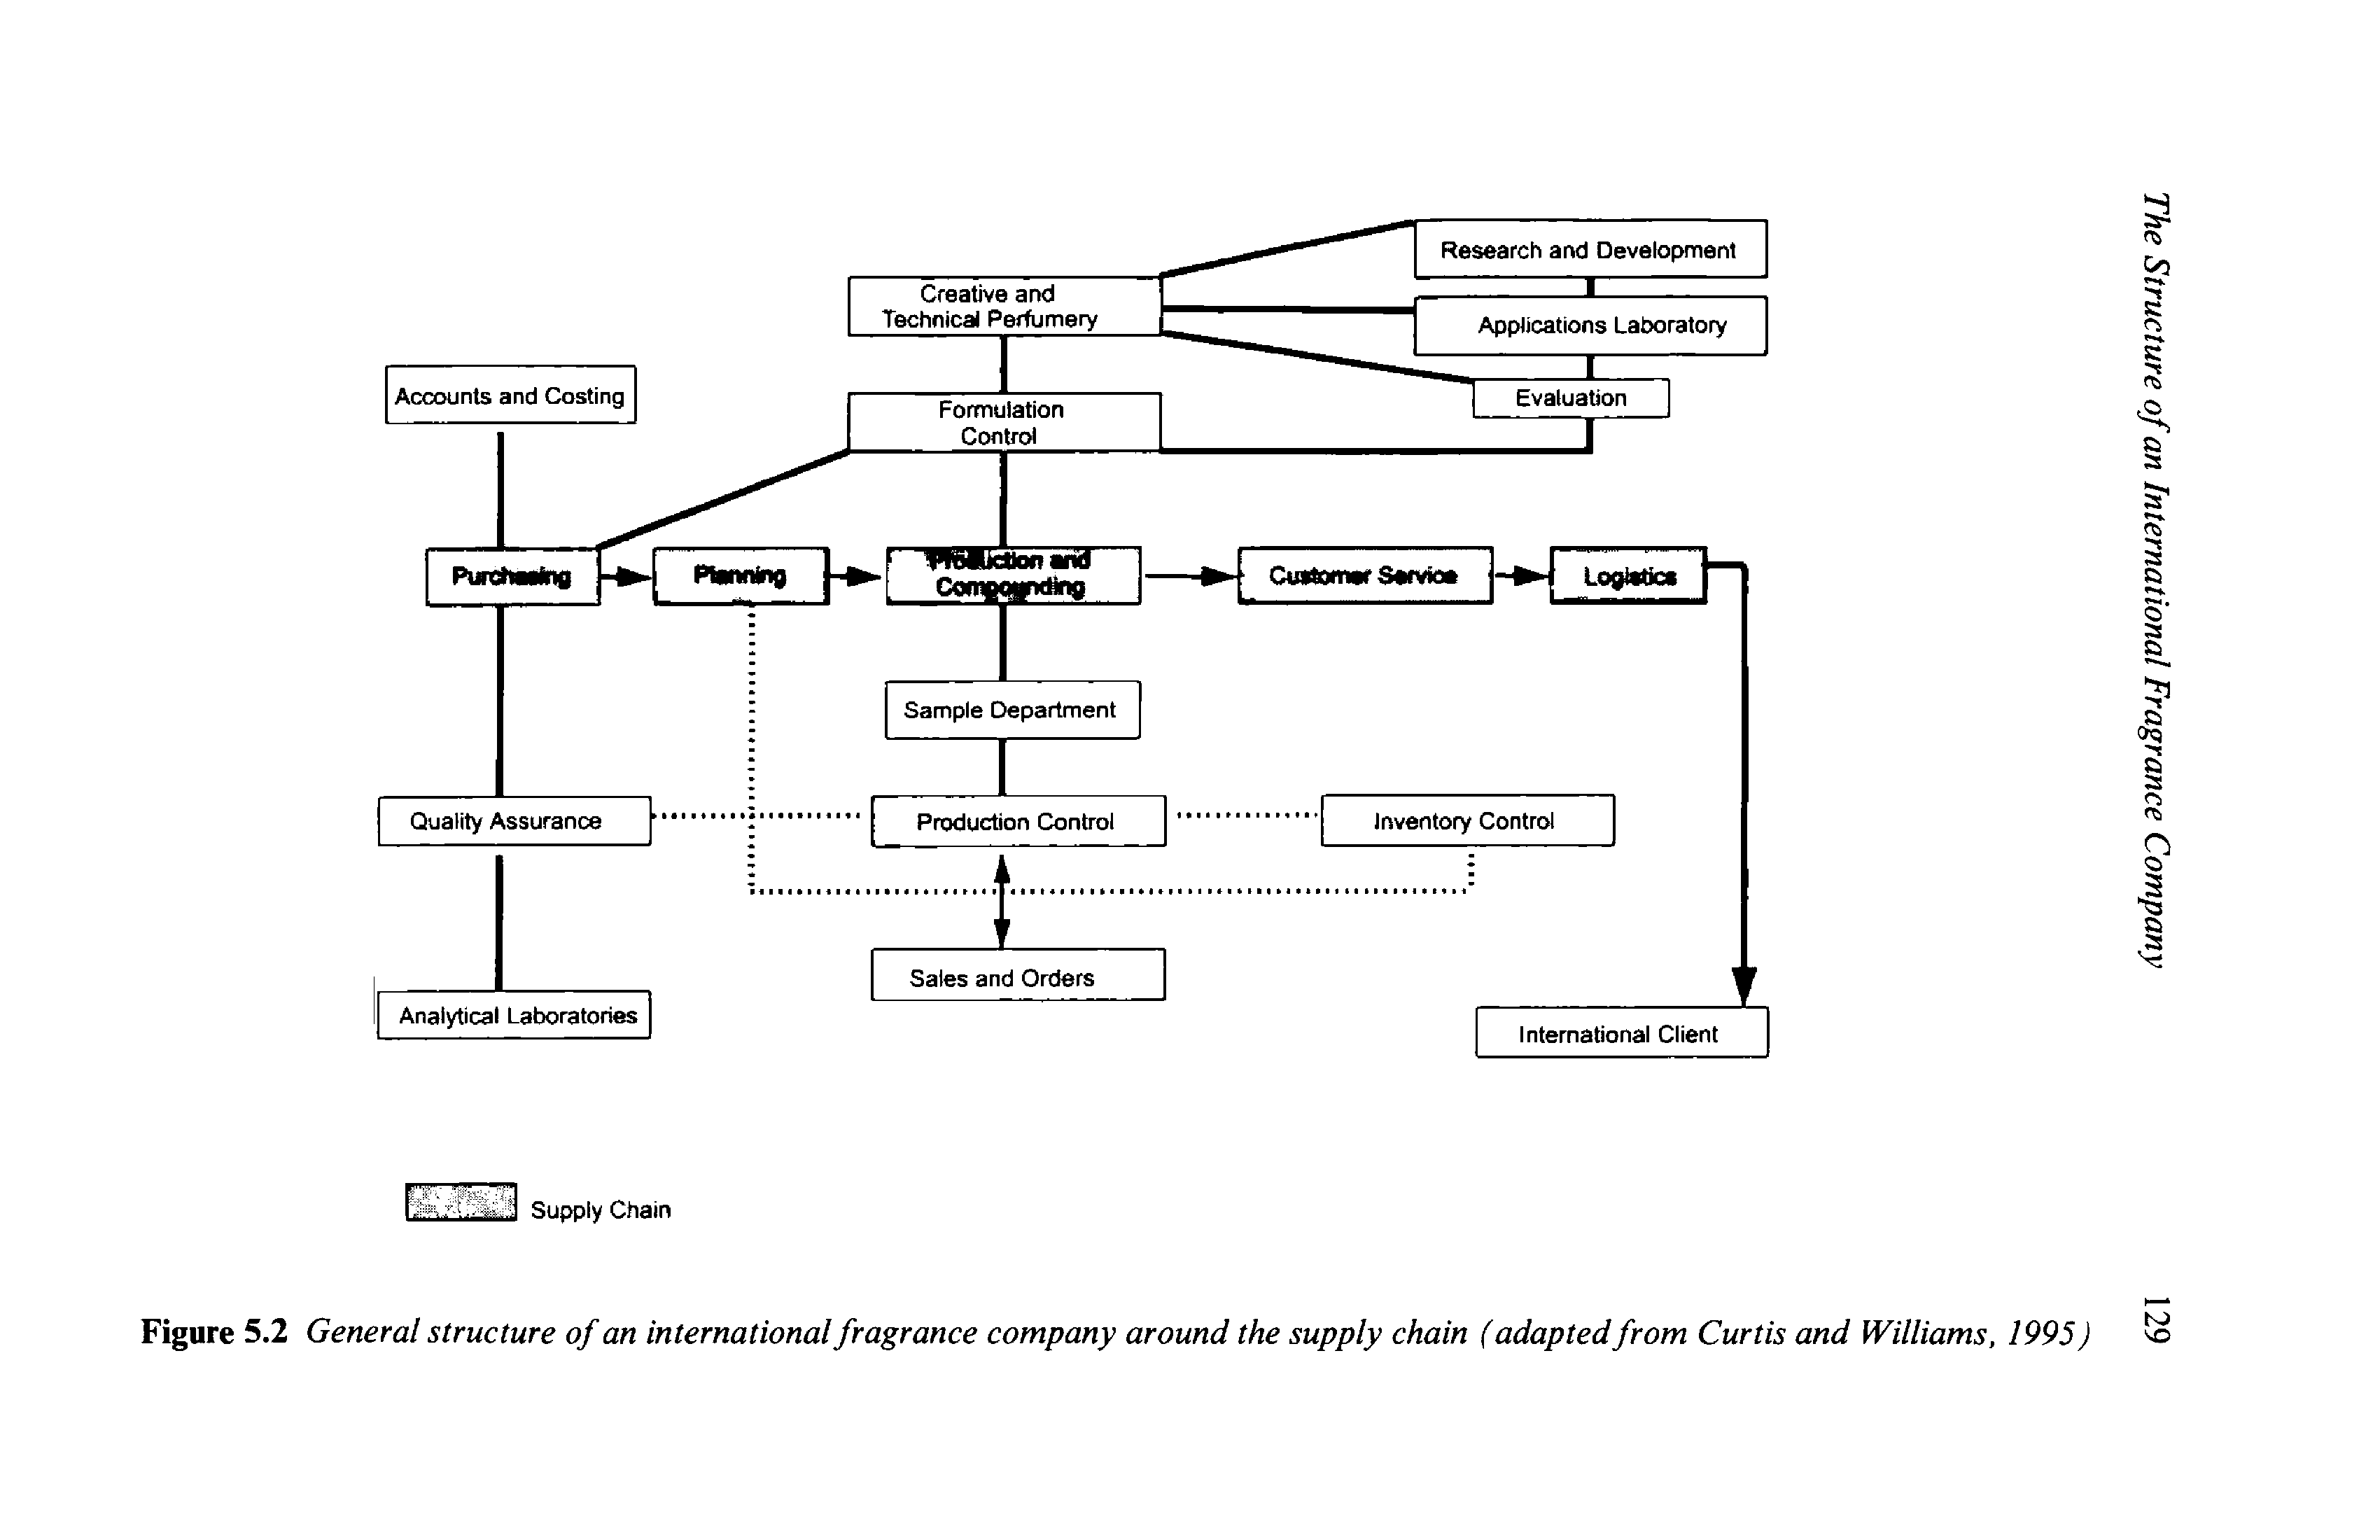 Figure 5.2 General structure of an international fragrance company around the supply chain (adapted from Curtis and Williams, 1995)...